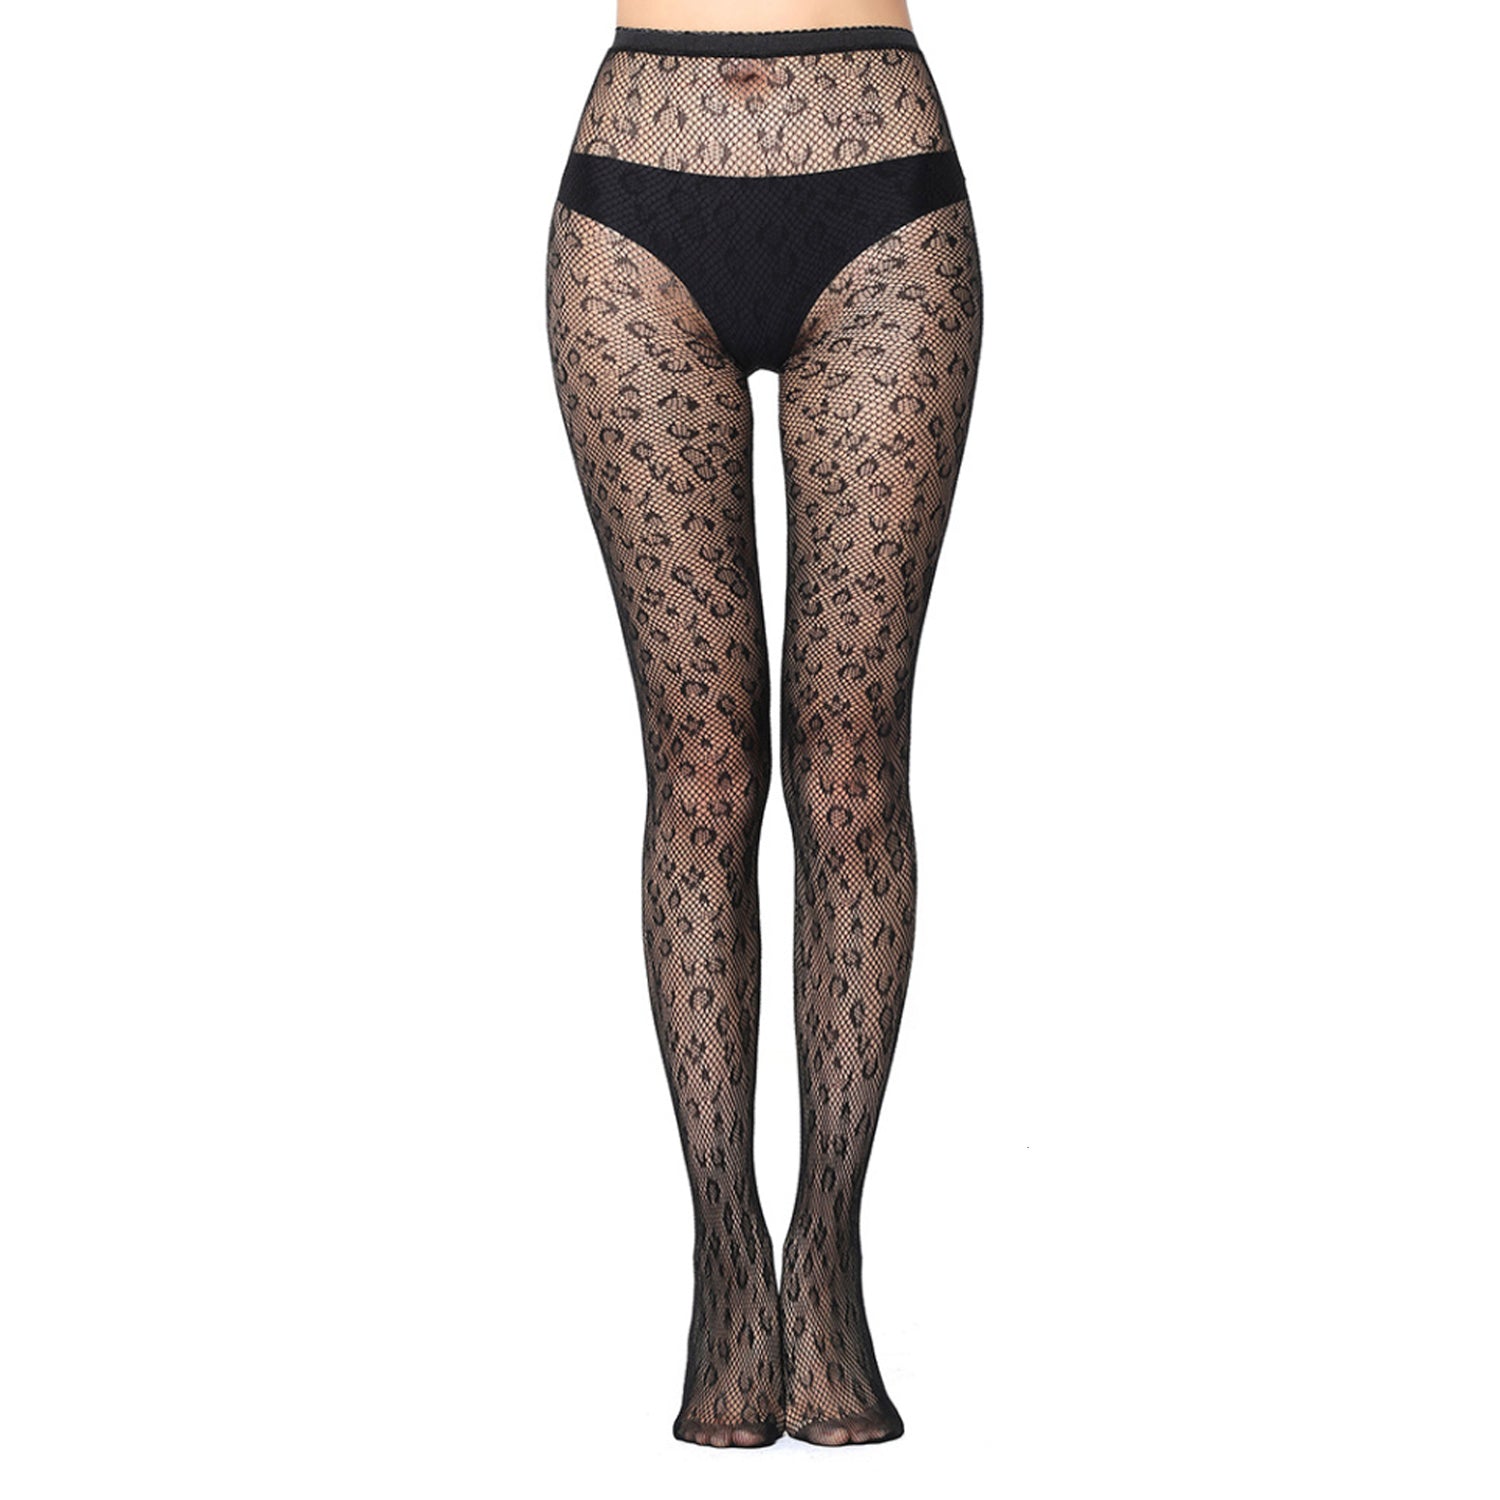 Simply Joshimo Leopard Patterned Black Footless Fishnet Tights